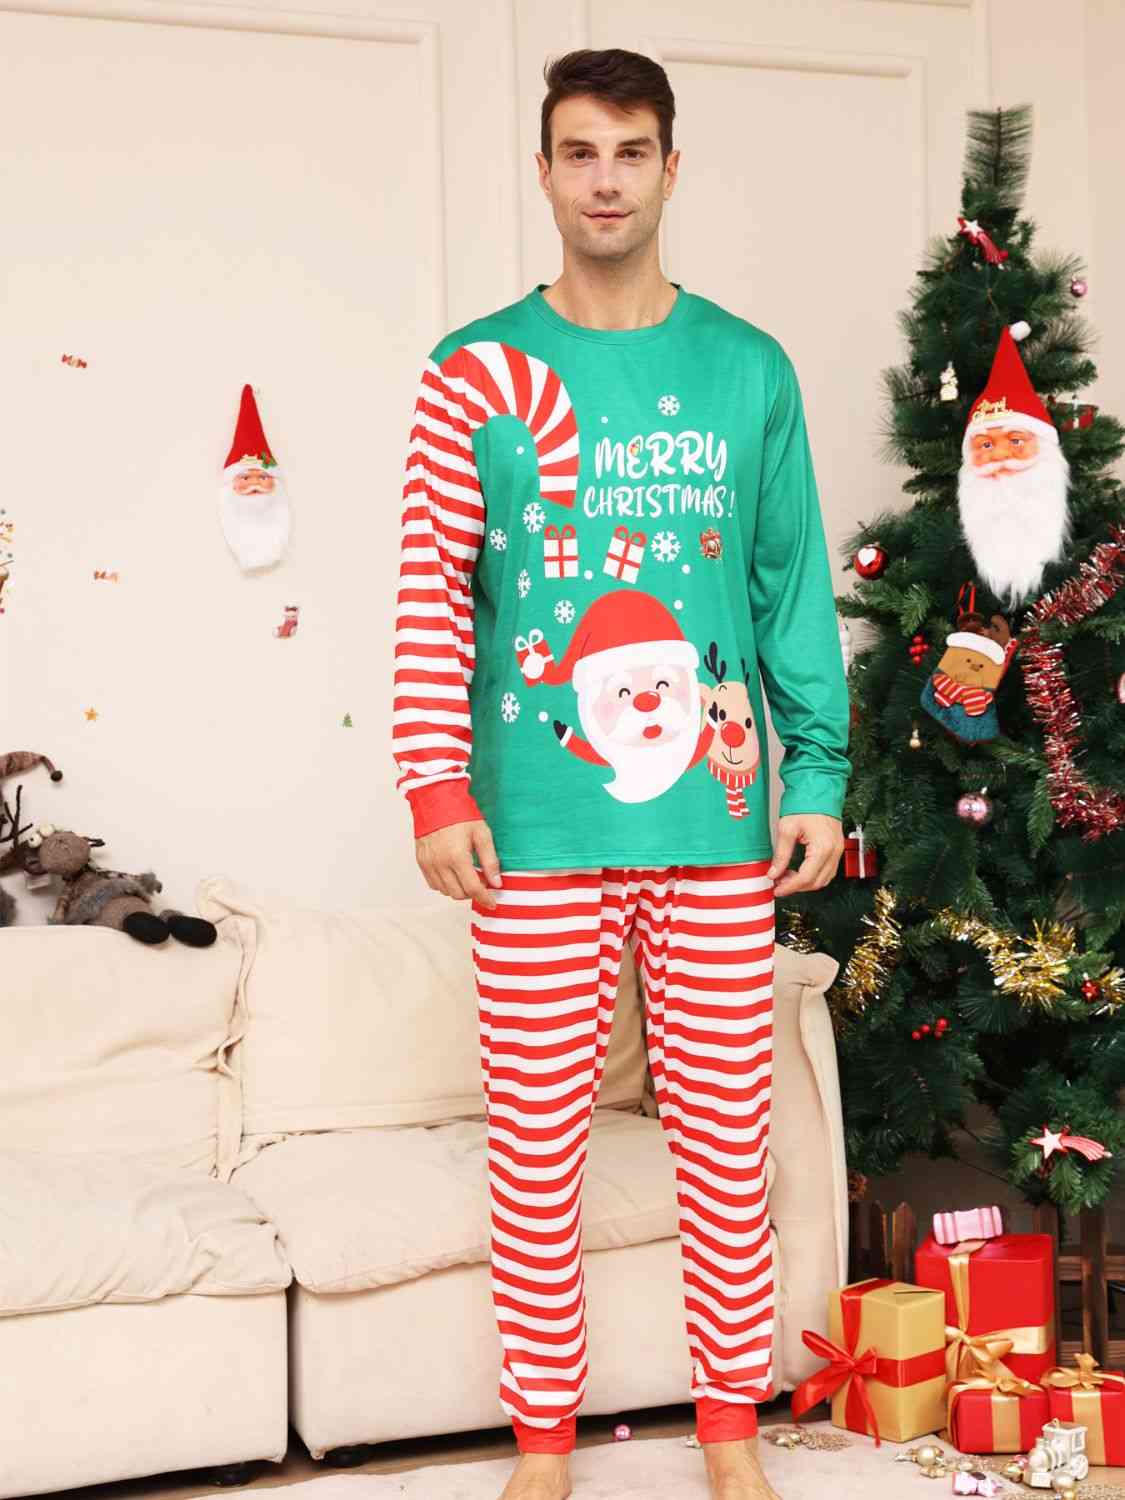 Full Size MERRY CHRISTMAS Top and Pants Set - Kawaii Stop - Cheerful Design, Christmas, Christmas Ensemble, Christmas Spirit, Comfortable Fit, Cozy Celebration, Festive Attire, Holiday Comfort, Holiday Wardrobe, Seasonal Style, Ship From Overseas, Two-Piece Set, Z.Y@